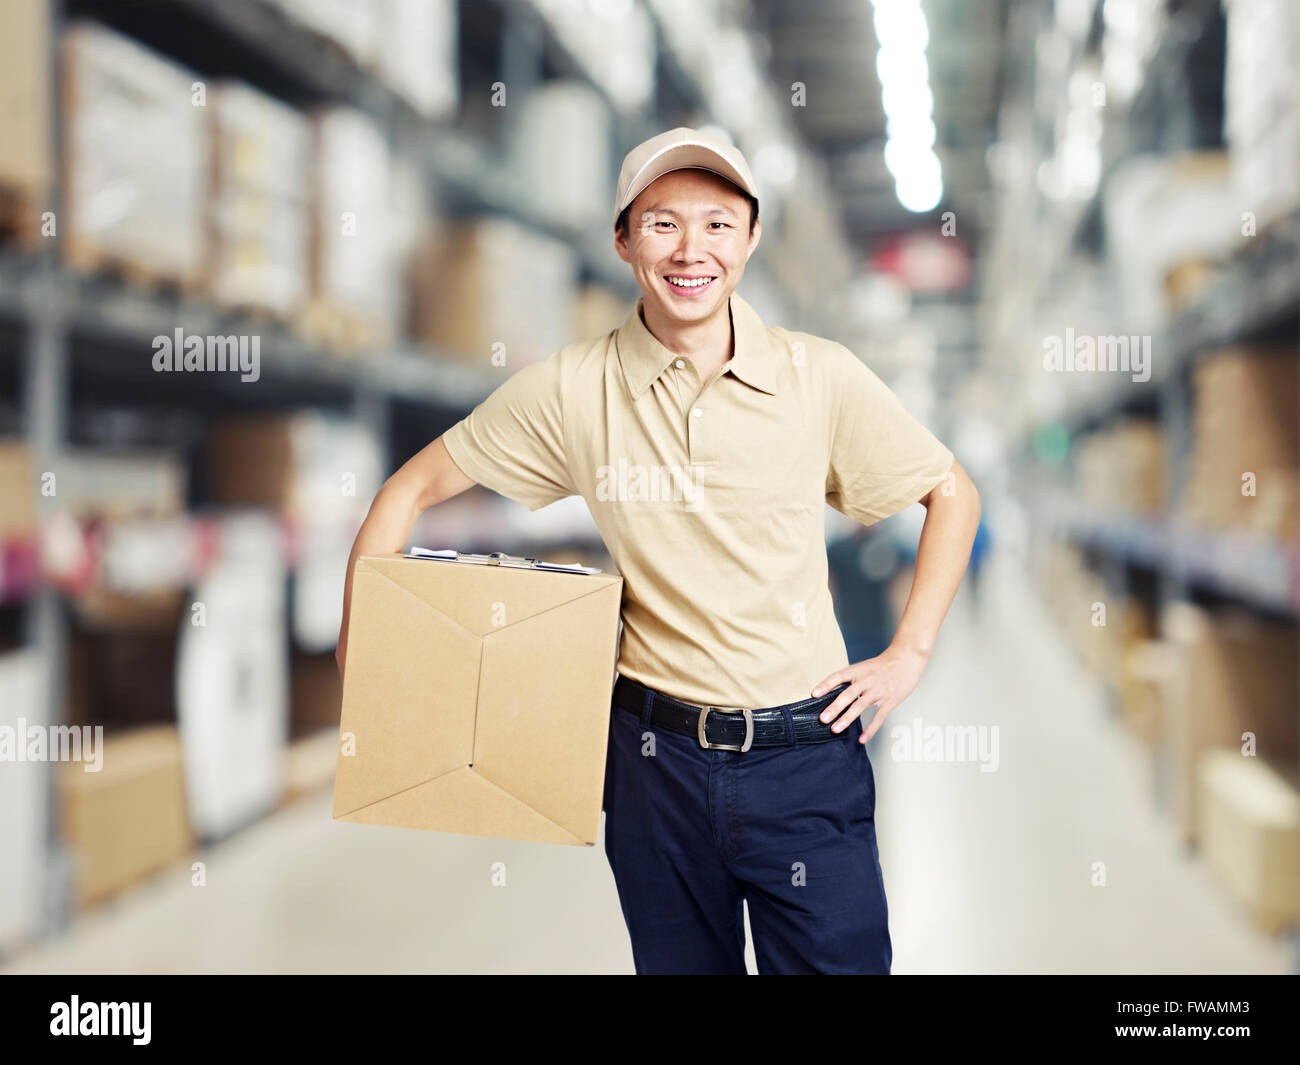 portrait of a smiling young warehouse worker Stock Photo